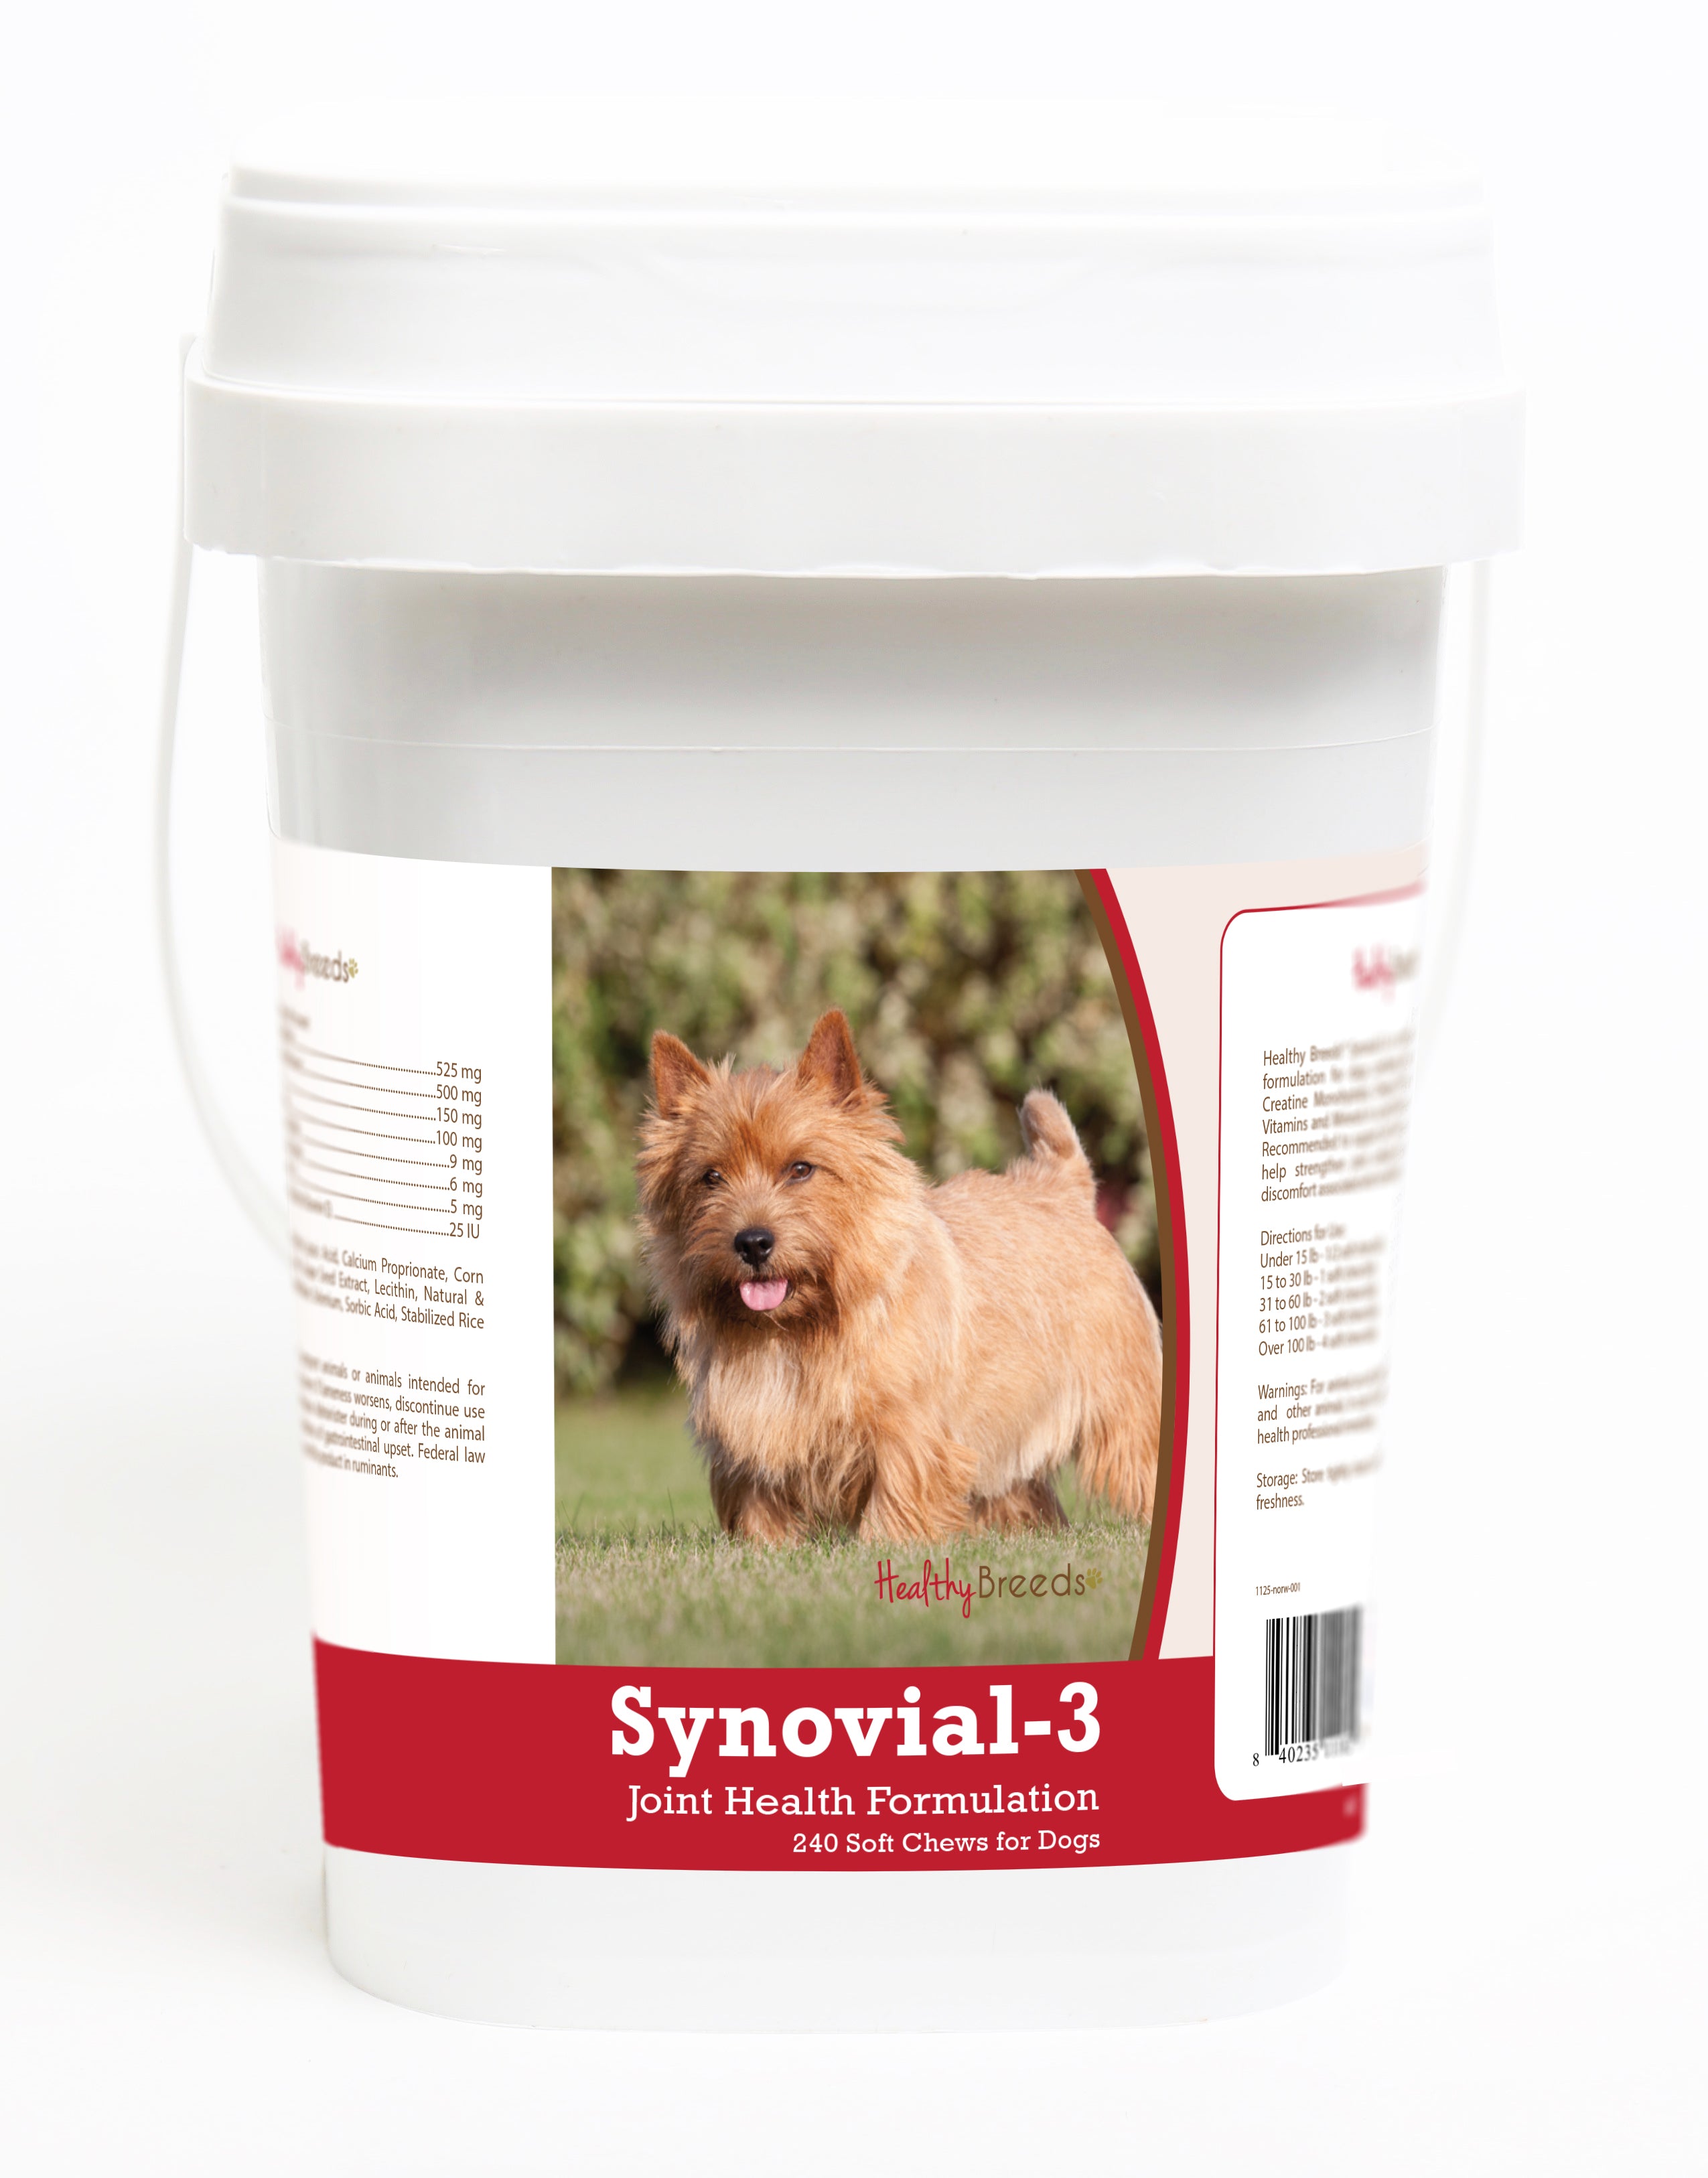 Norwich Terrier Synovial-3 Joint Health Formulation Soft Chews 240 Count